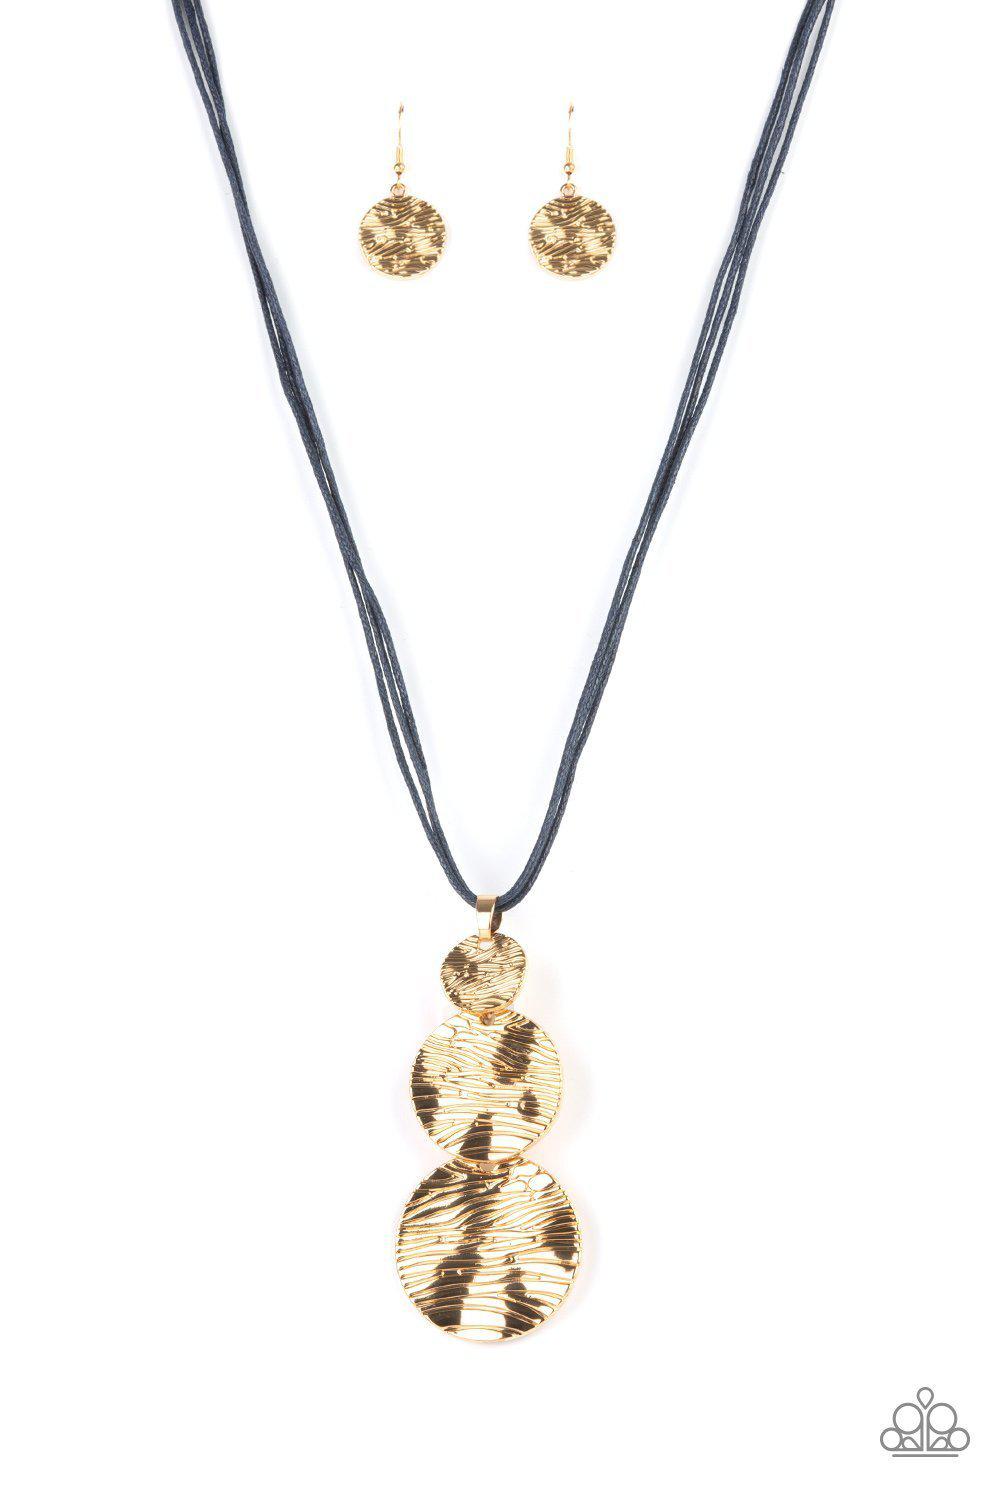 Circulating Shimmer Blue and Gold Necklace - Paparazzi Accessories - lightbox -CarasShop.com - $5 Jewelry by Cara Jewels